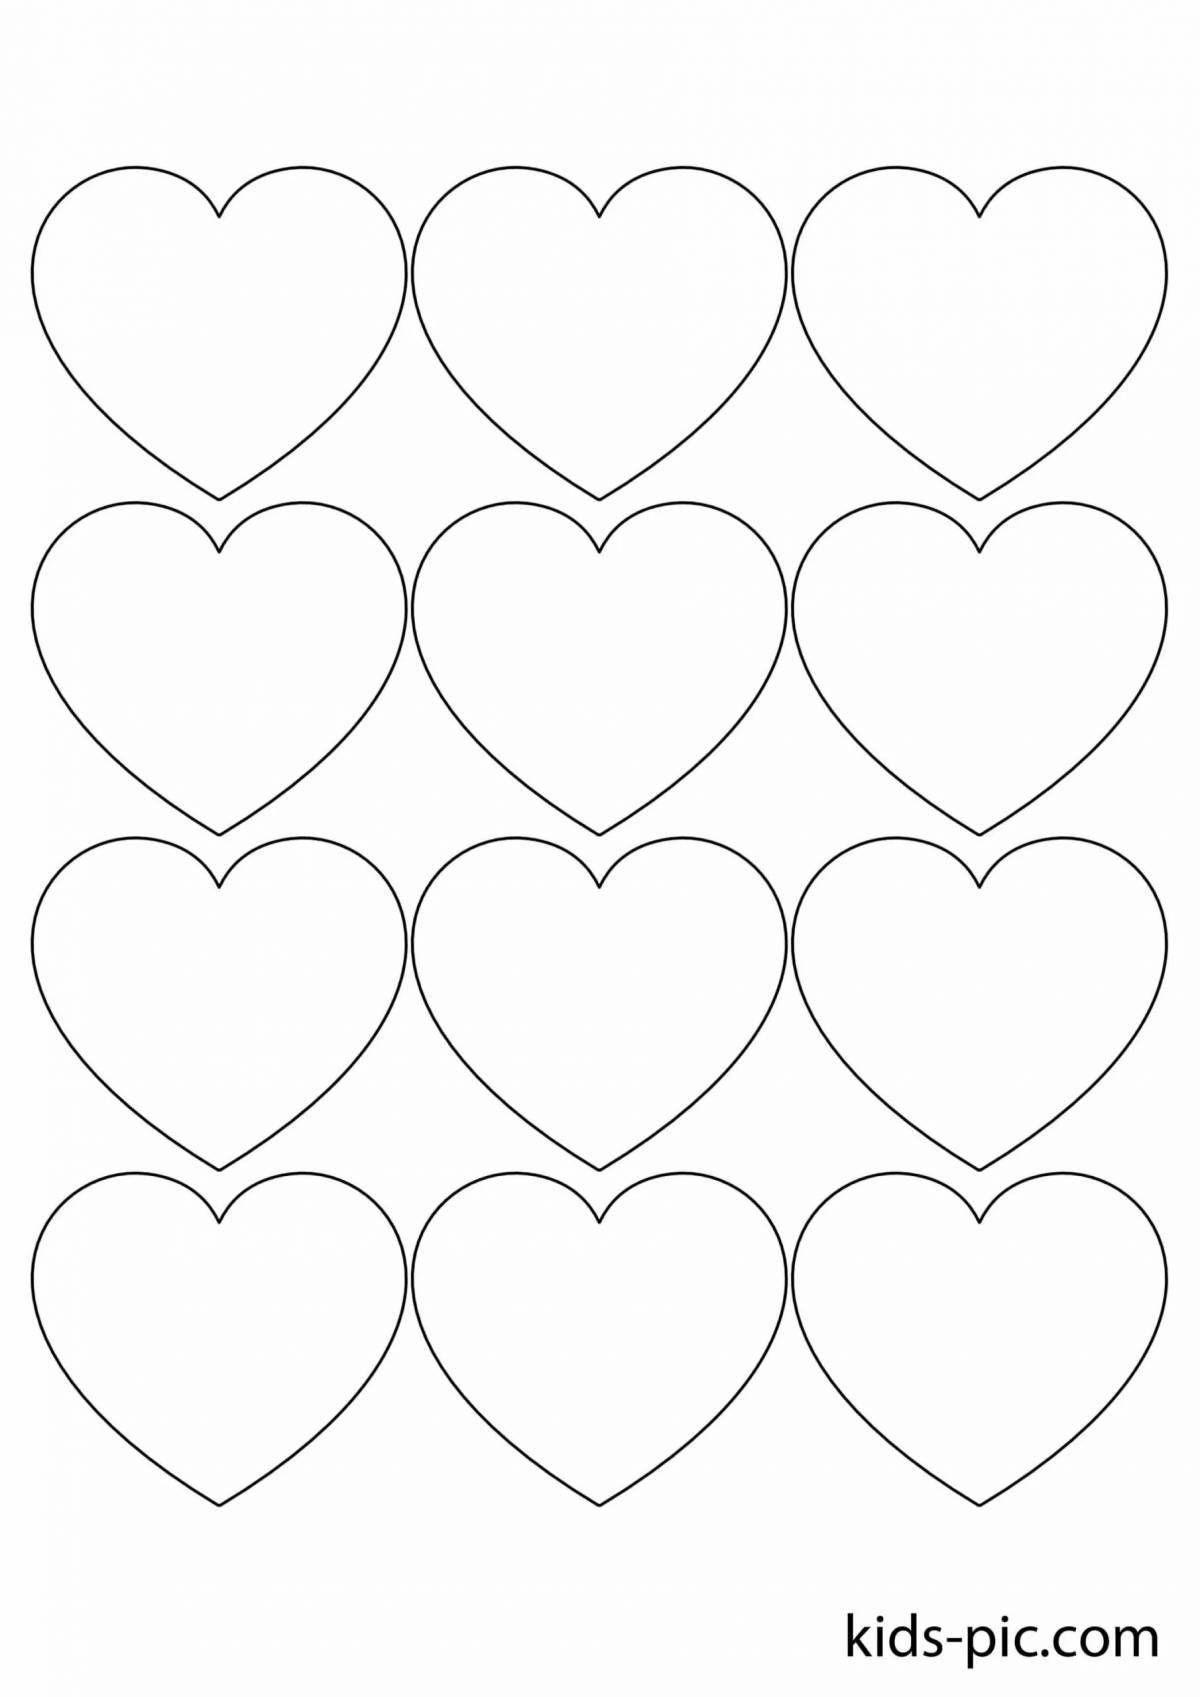 Exquisite little heart coloring book